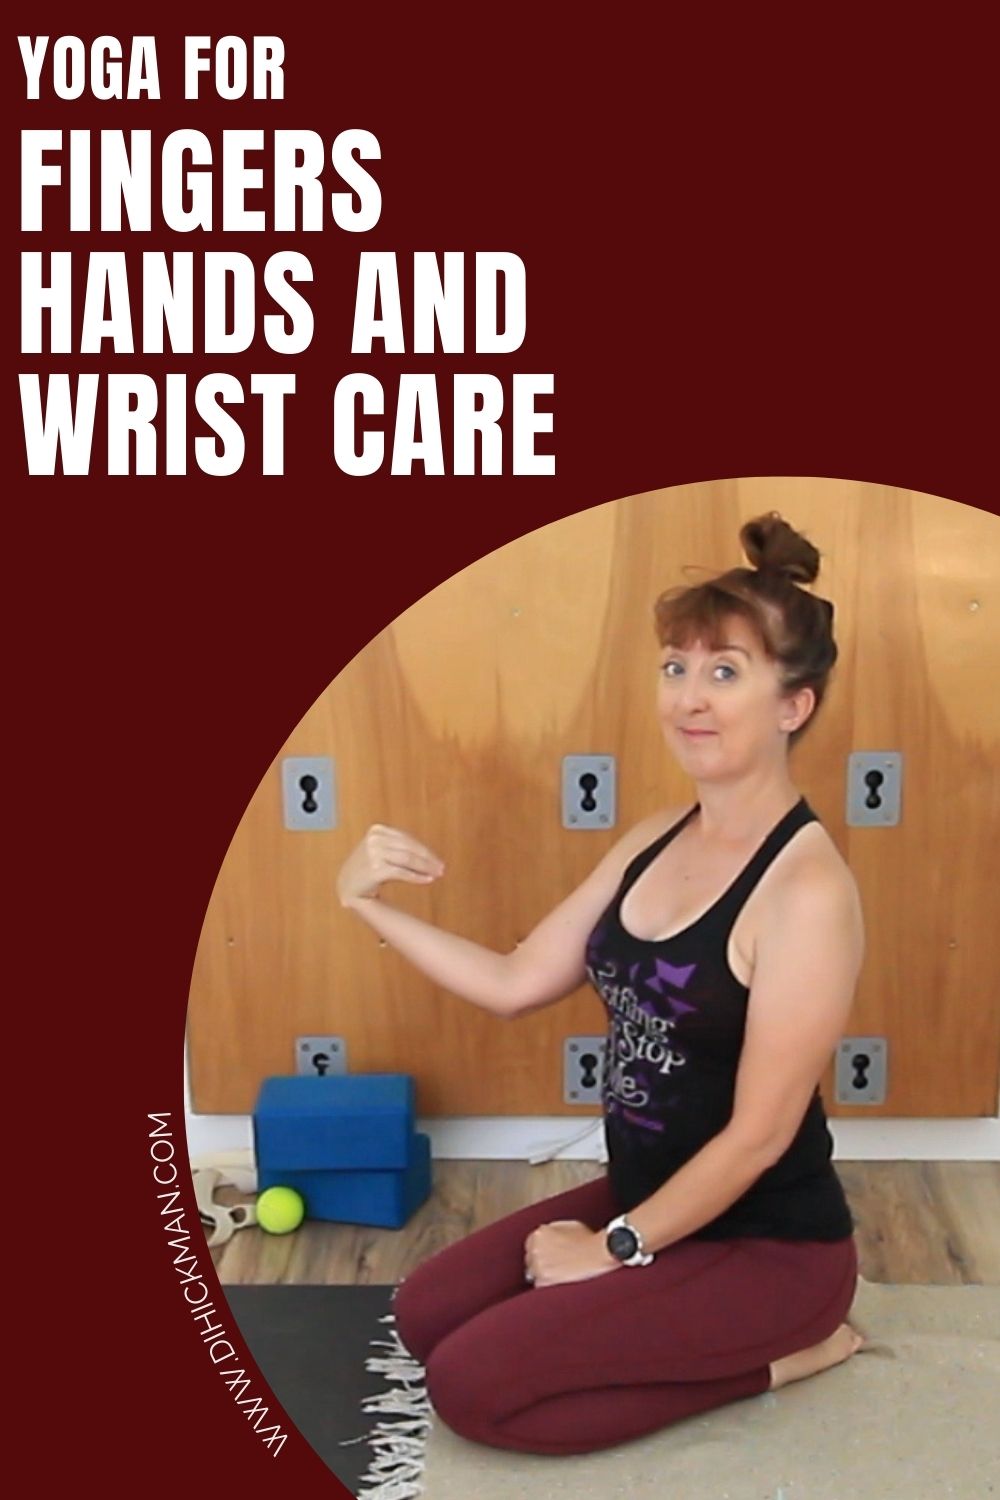 YOGA FOR FINGERS HANDS AND WRIST CARE